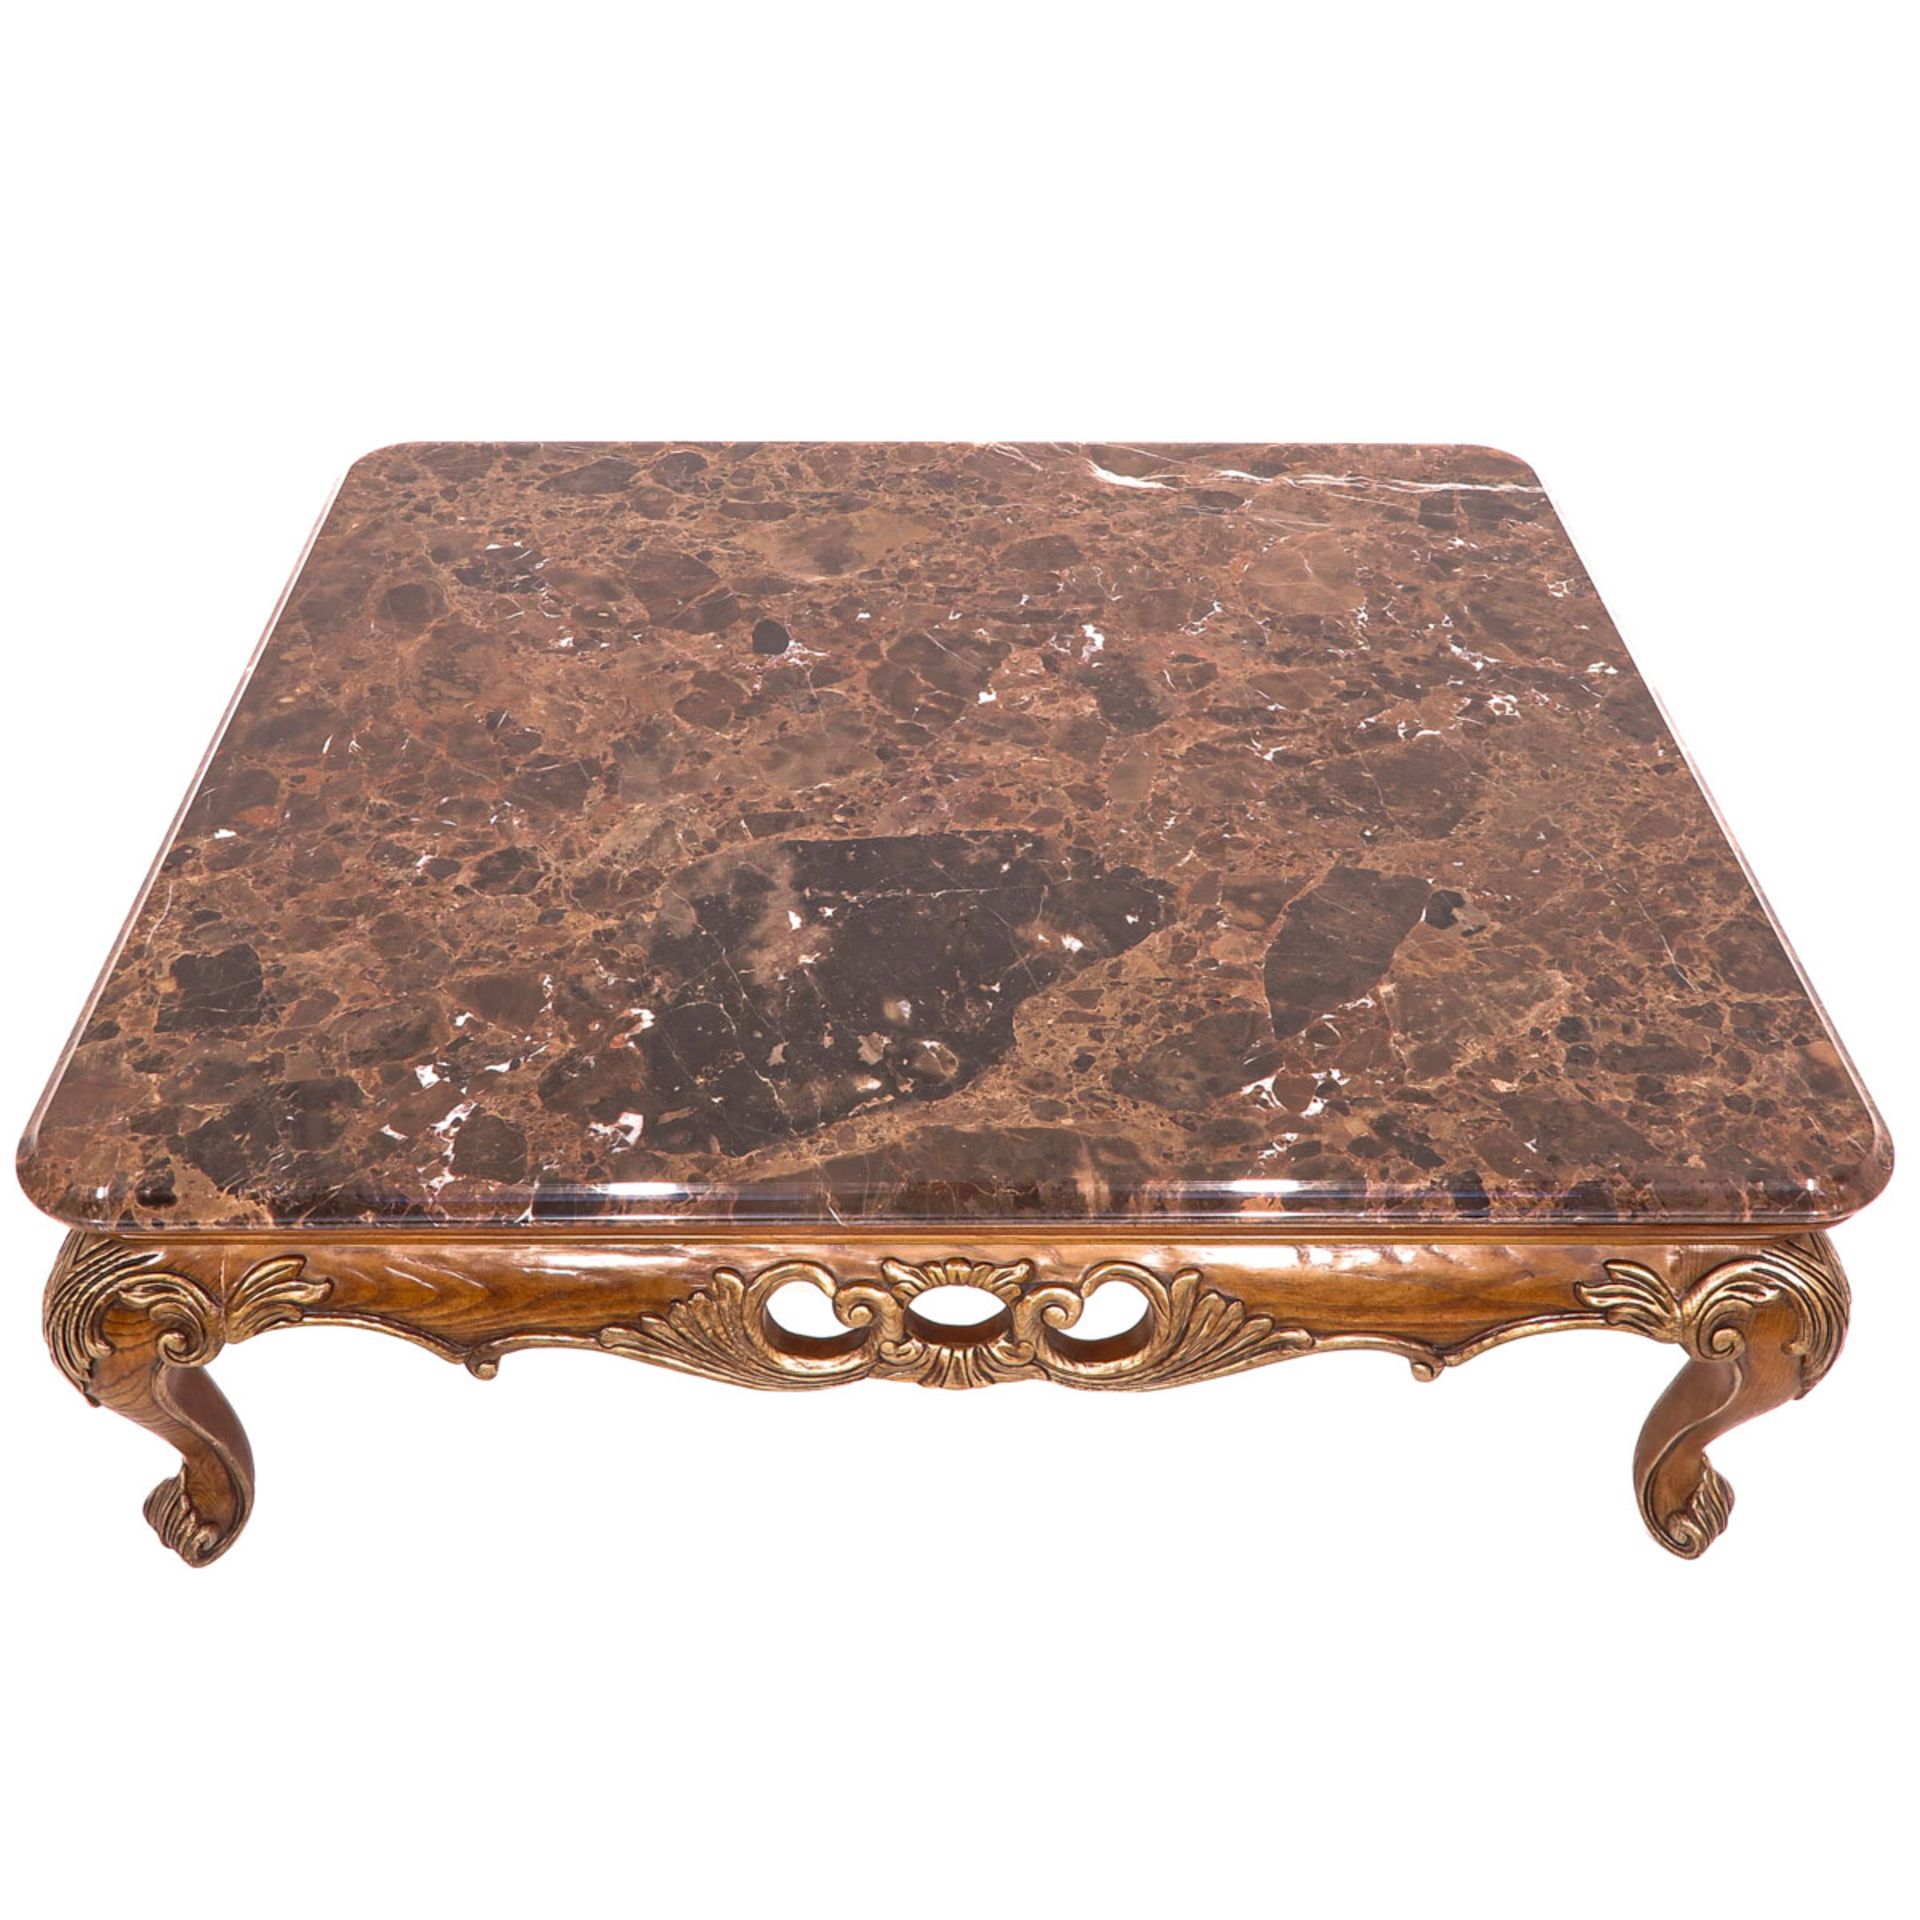 A Marble Top Coffee table - Image 4 of 8